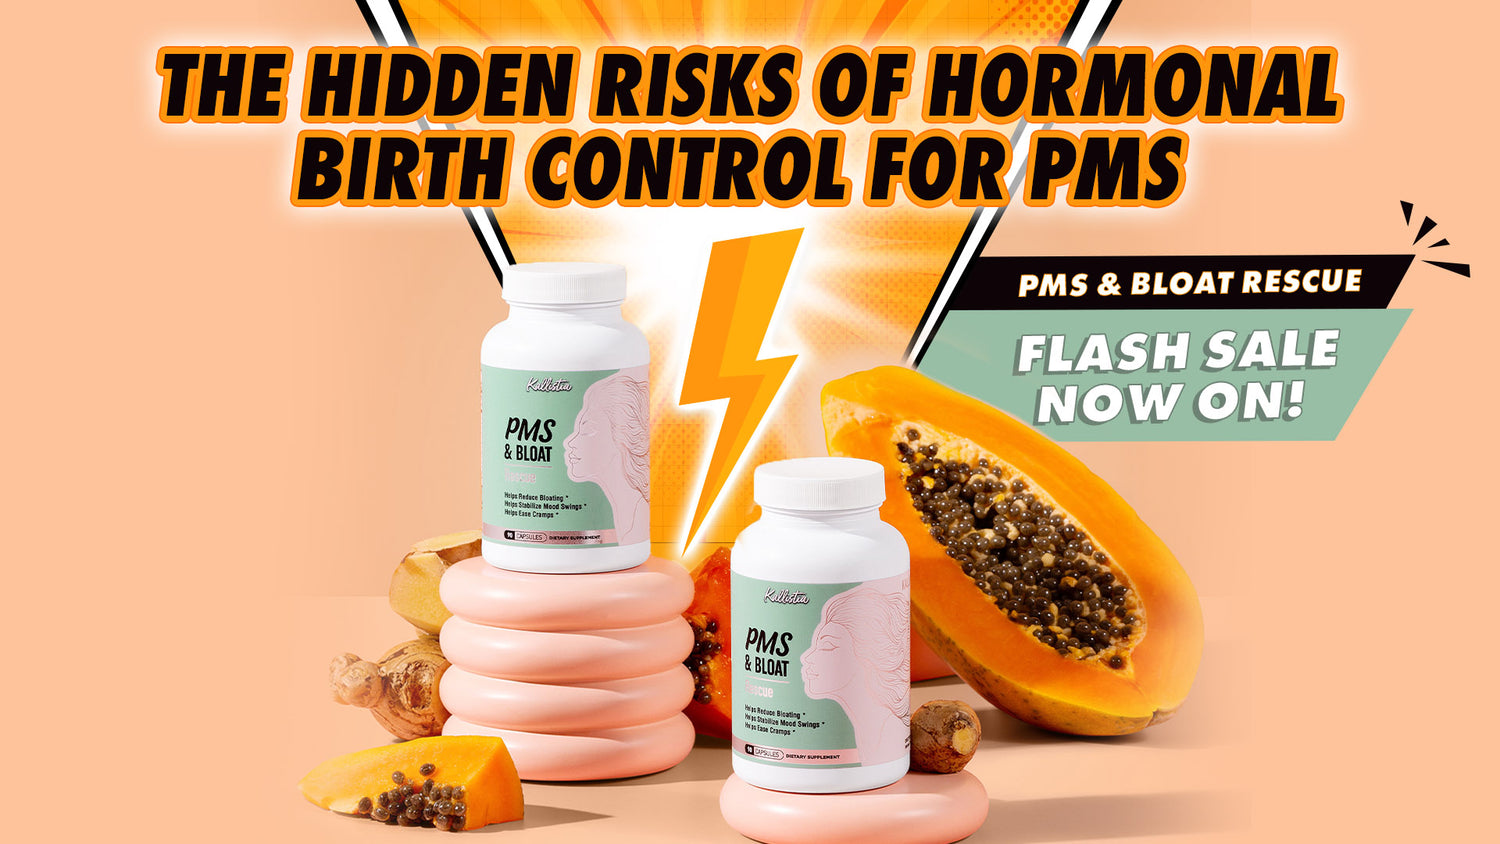 The Hidden Risks of Hormonal Birth Control for PMS